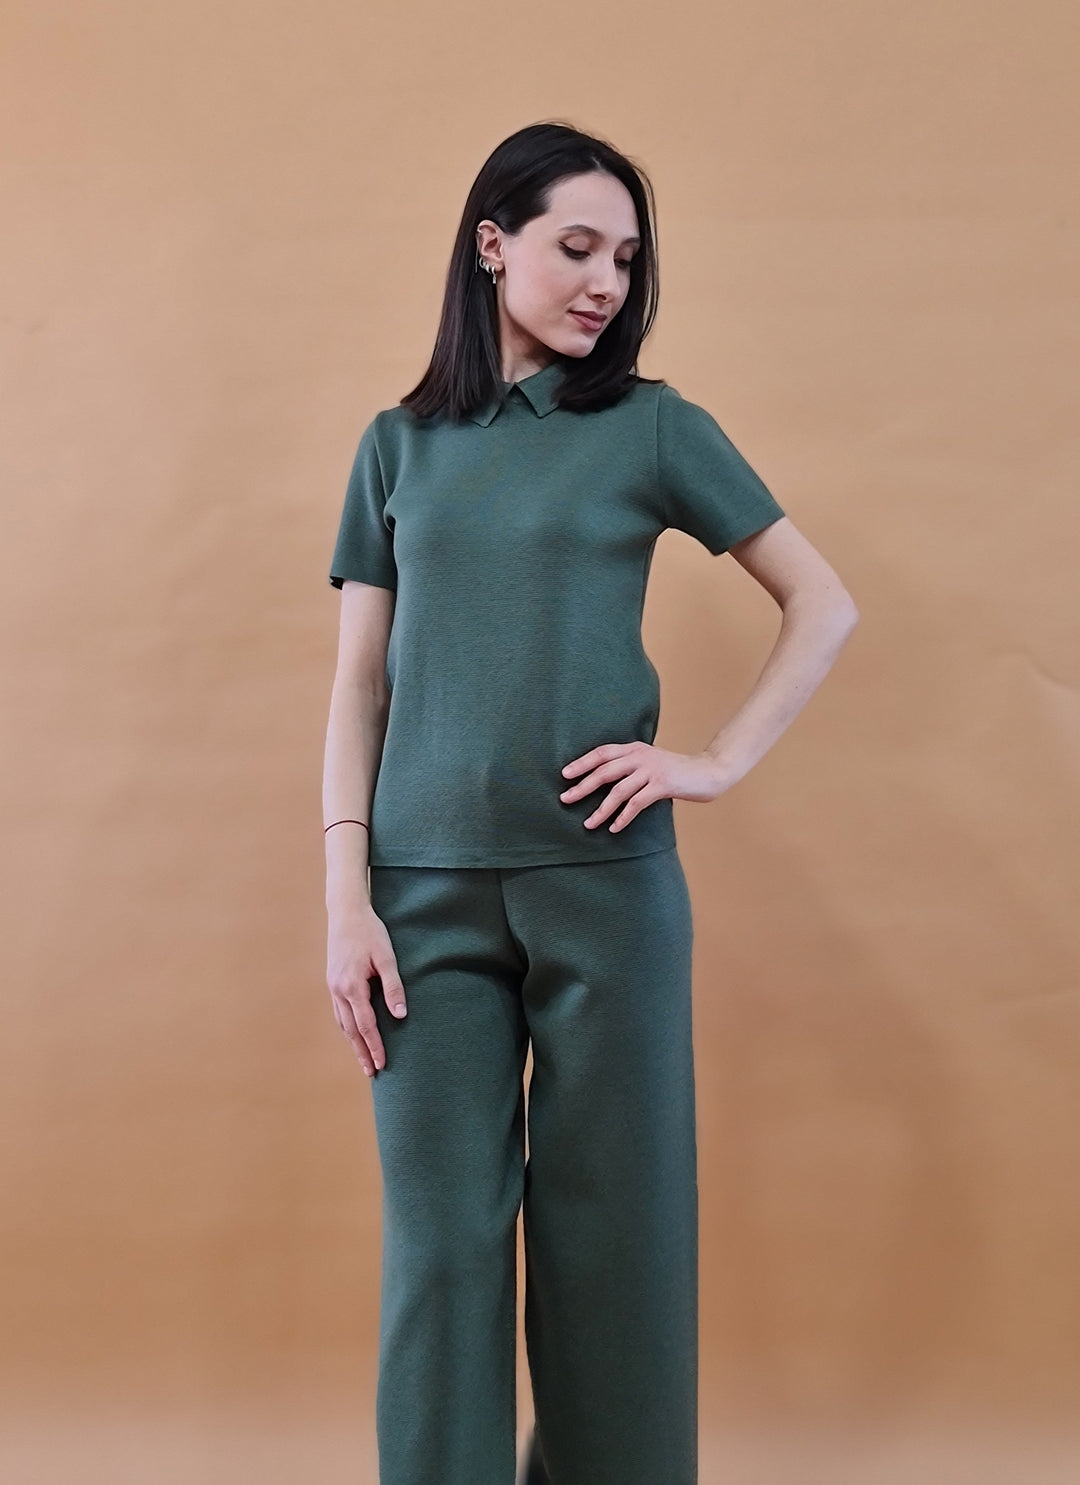 Woman wearing green collared short-sleeve shirt and matching wide-leg pants set against a tan background